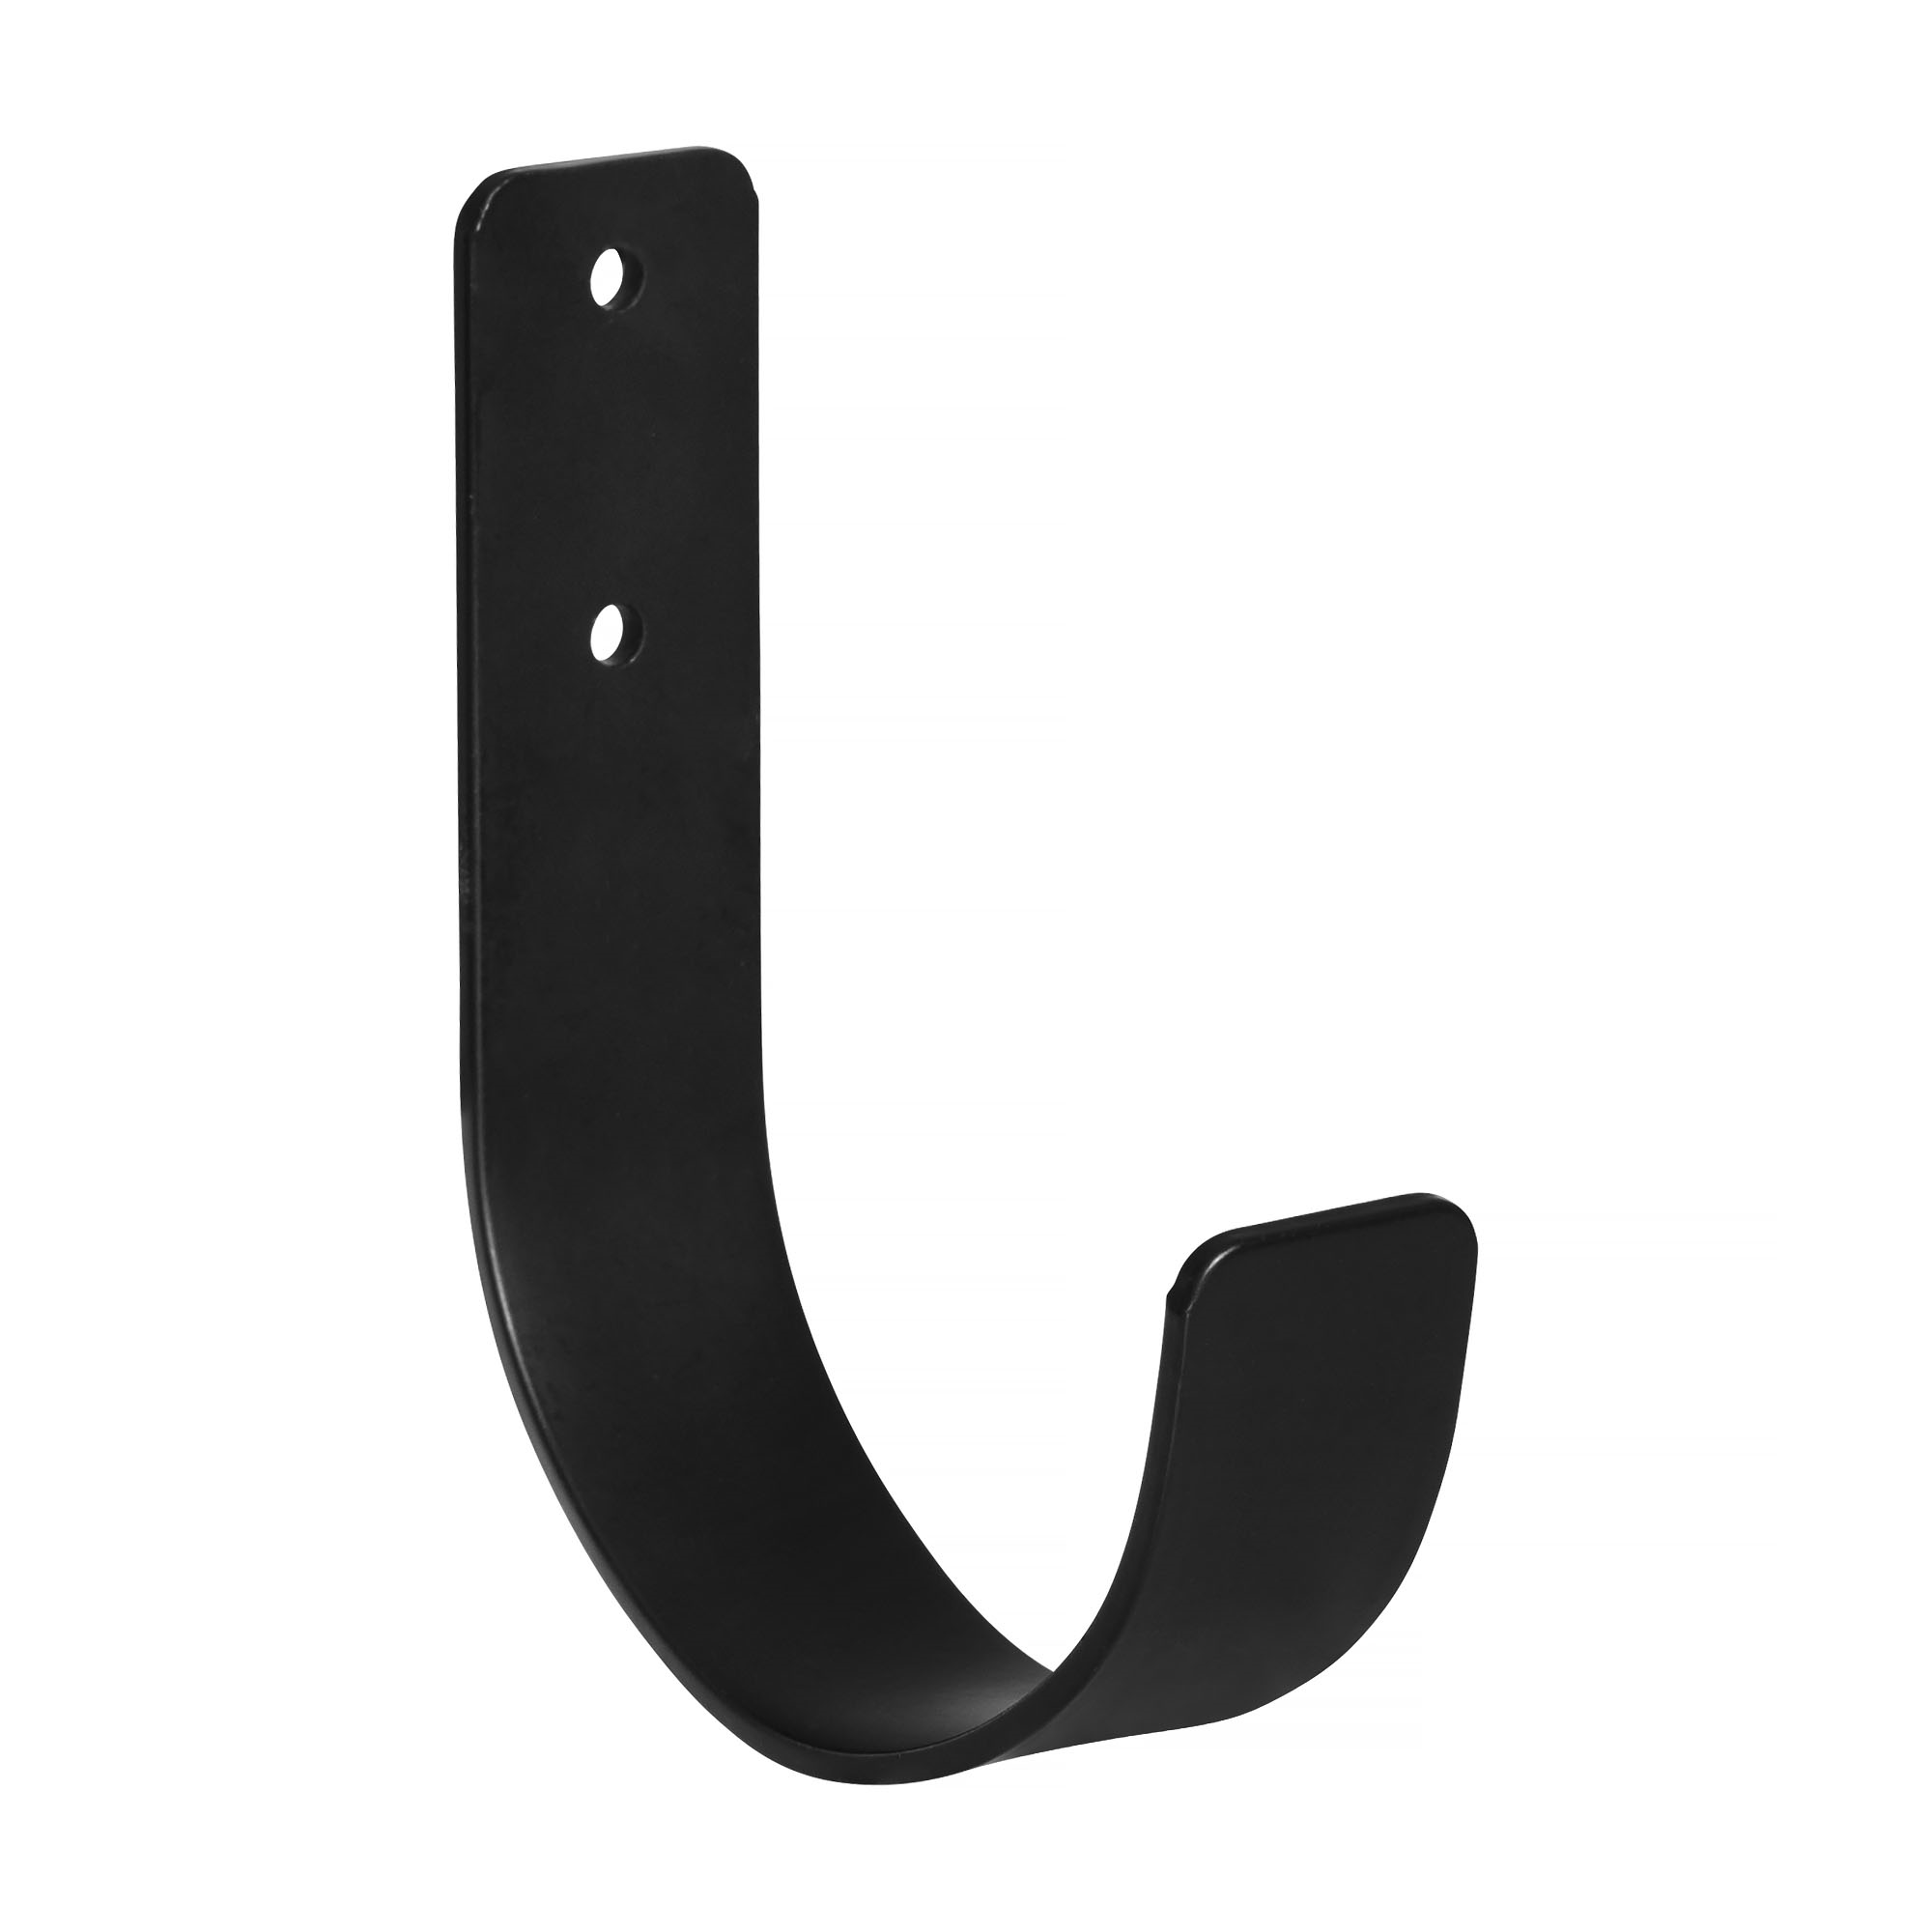 Wall hook for the Clever iron organizer, Powder coated matt black, metal